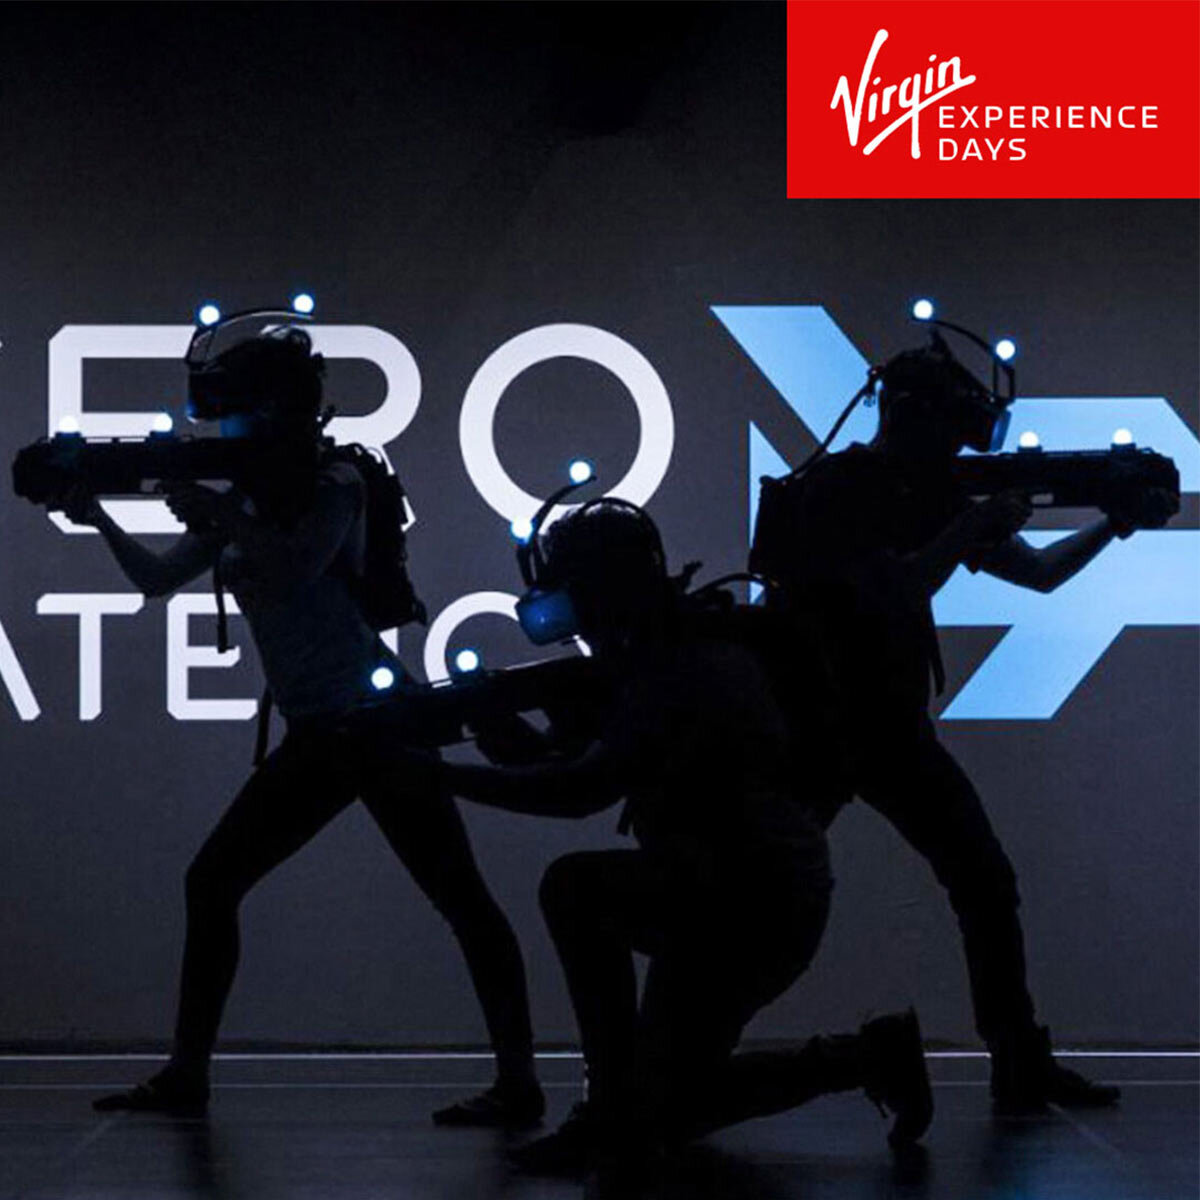 Virgin Experience Days Ultimate Free Roam Virtual Reality Experience for Four People at Zero Latency (12 Years +)